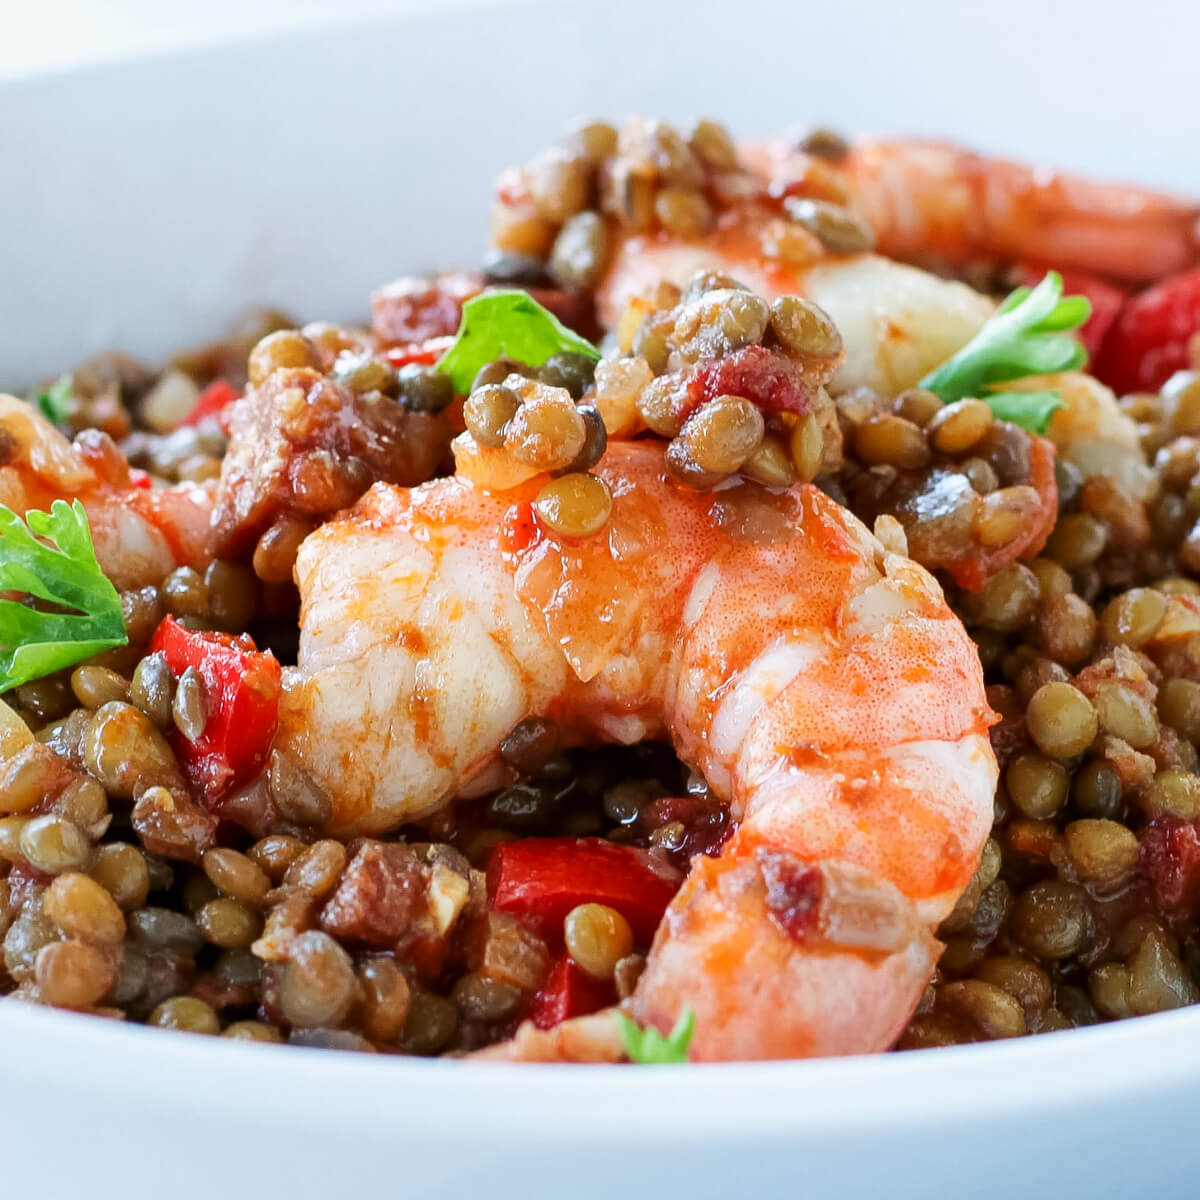 Brown lentils, red peppers, tomatoes, chorizo and shrimp in a white bowl.